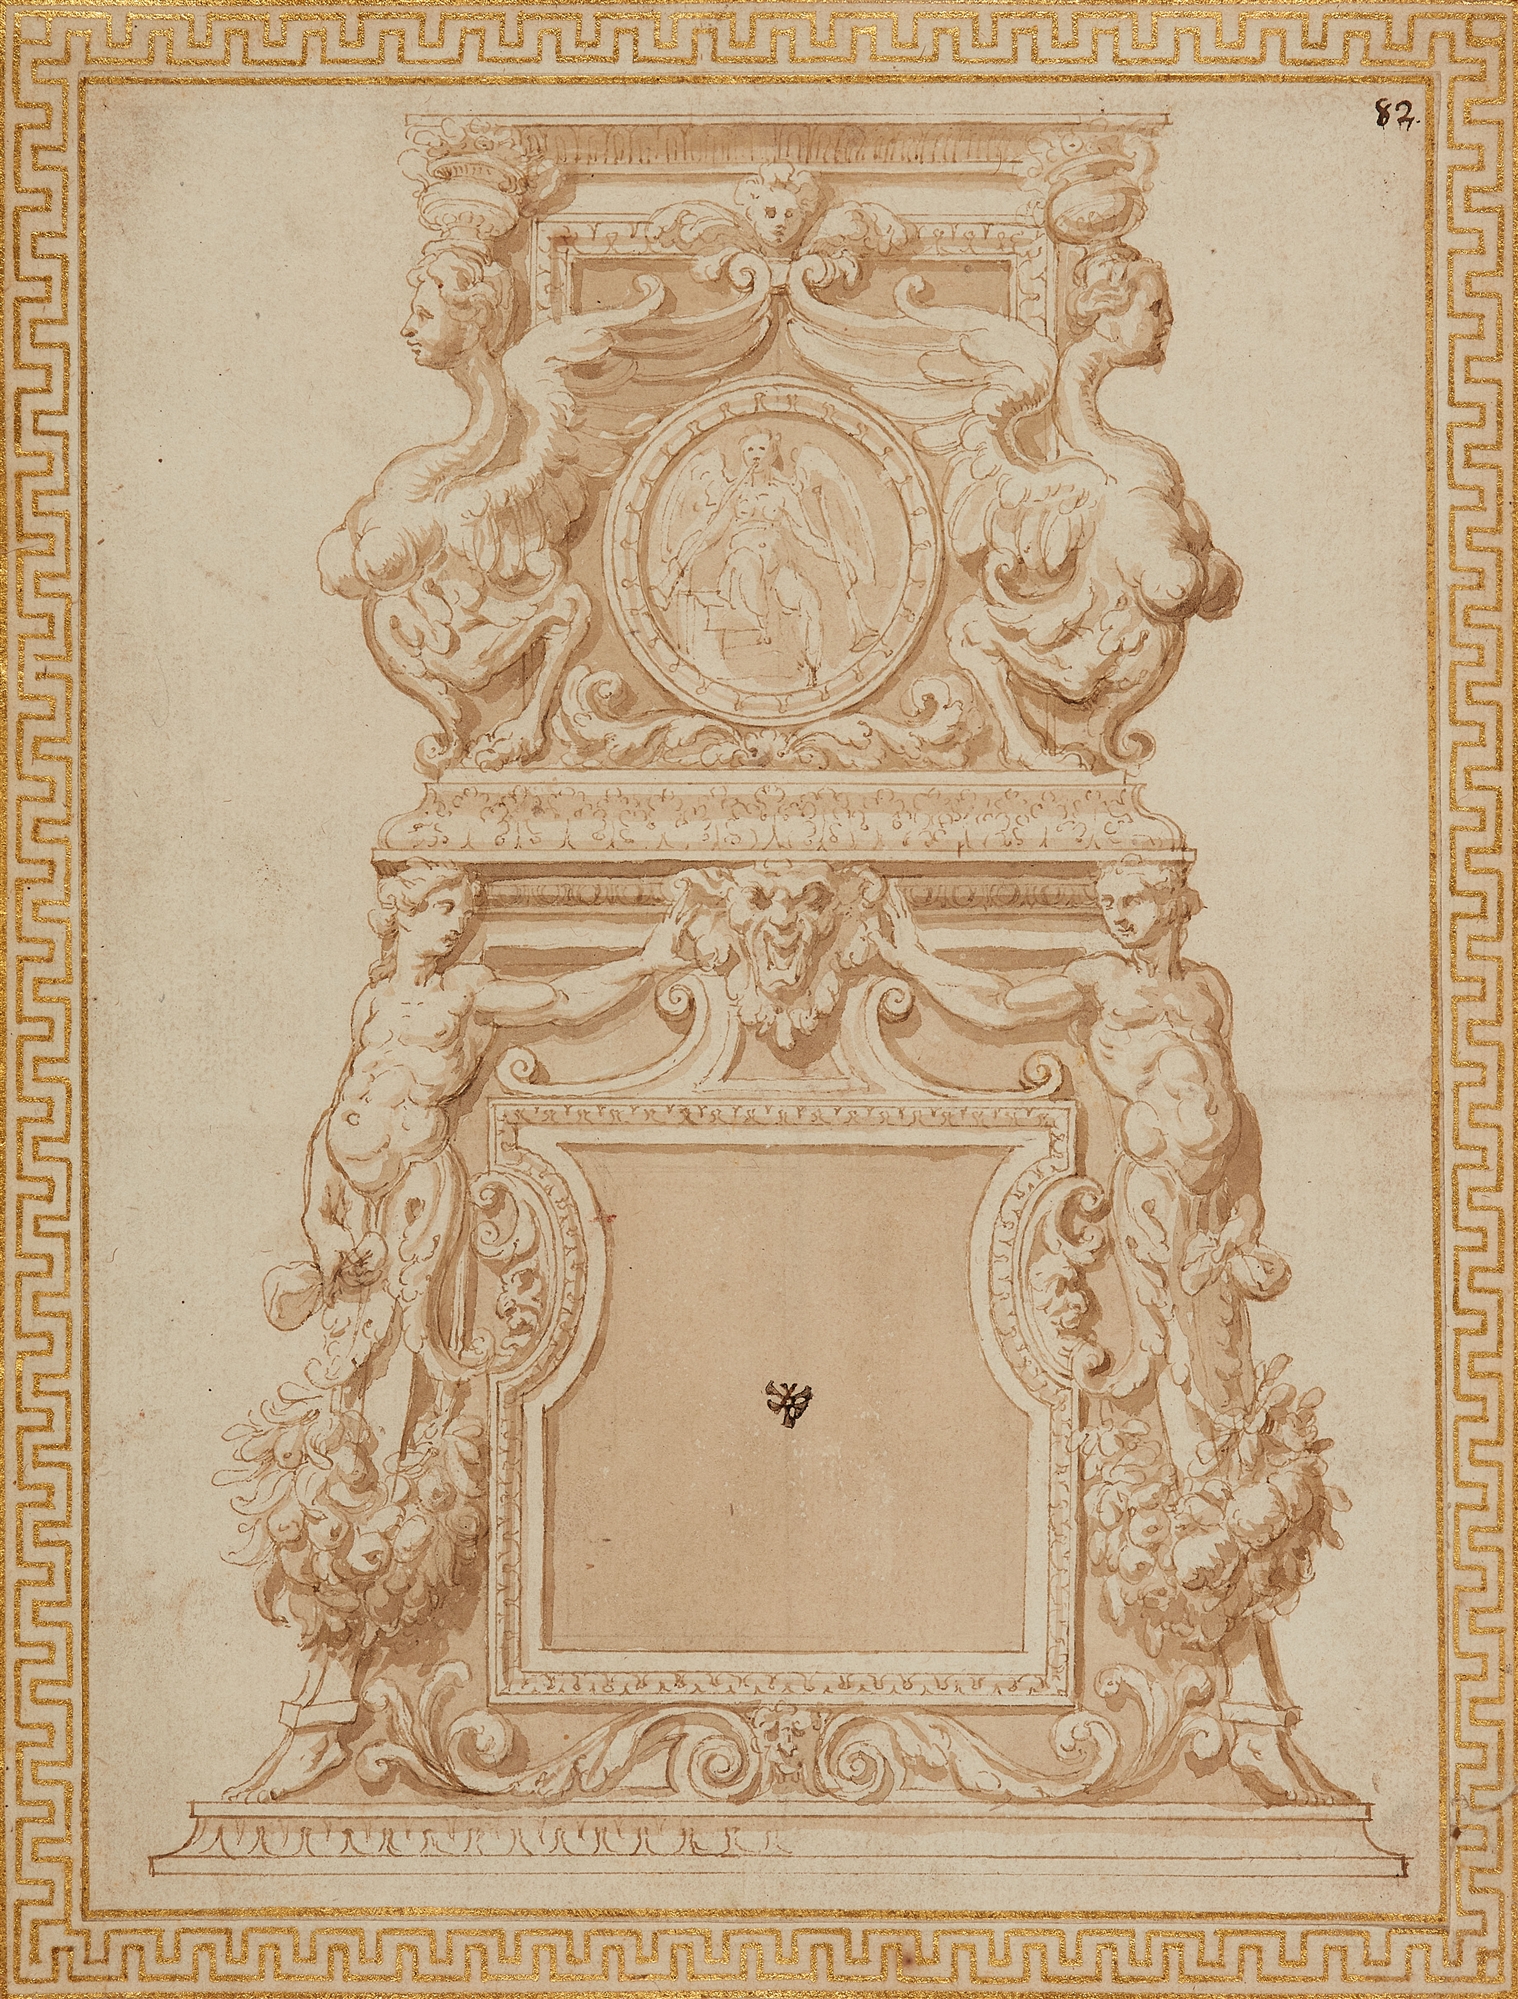 Marco Marchetti, Study for a Monument